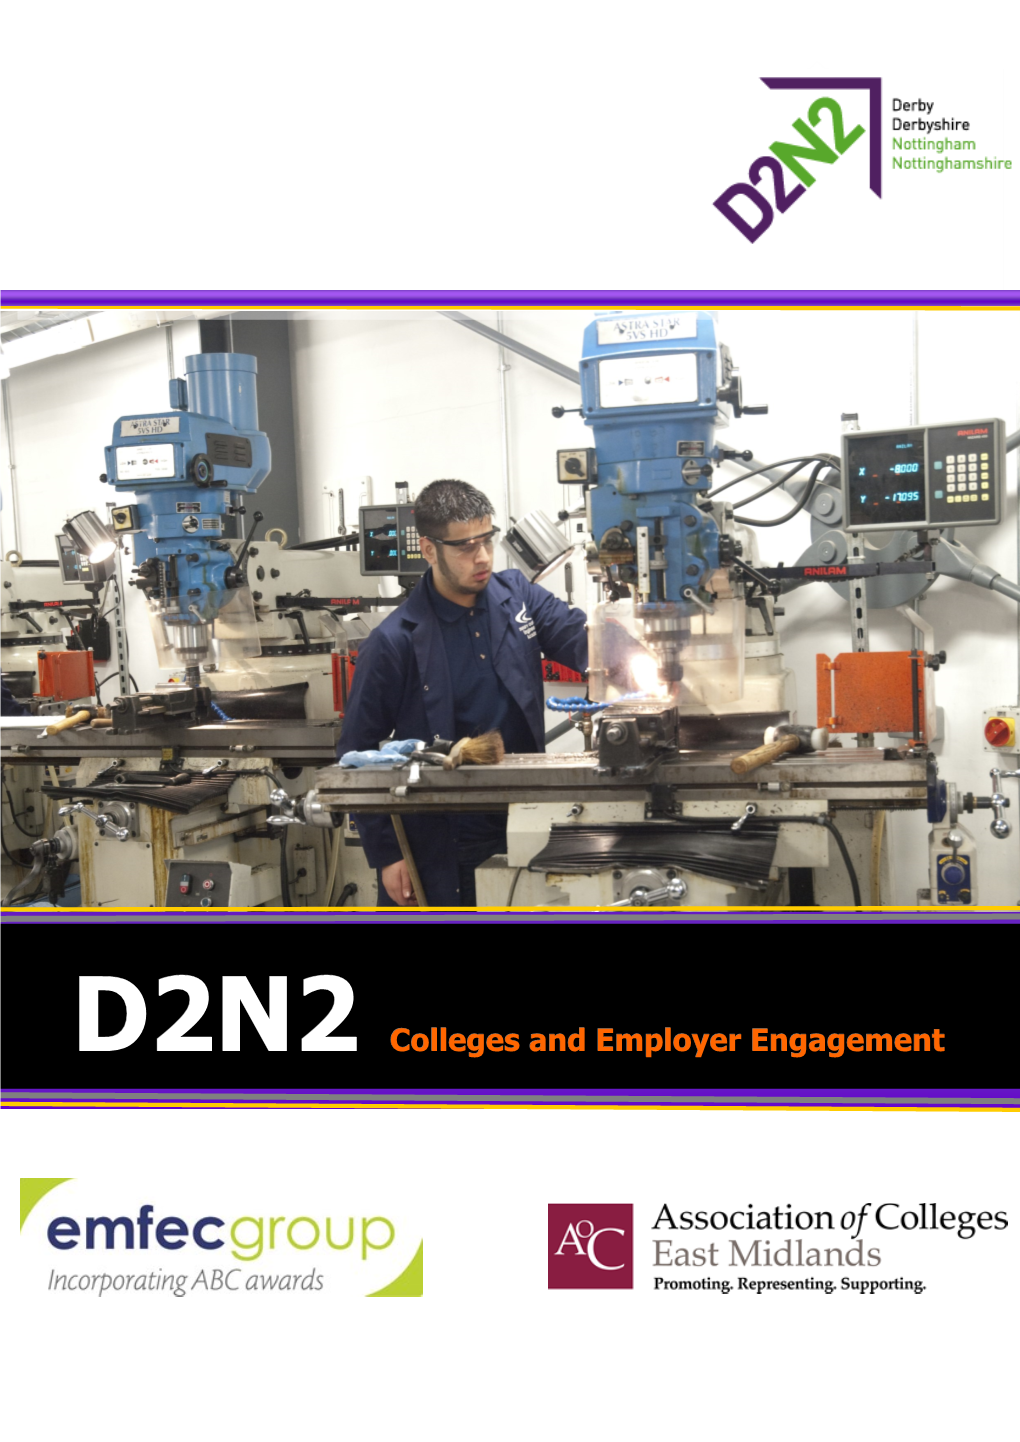 D2N2 Colleges and Employer Engagement